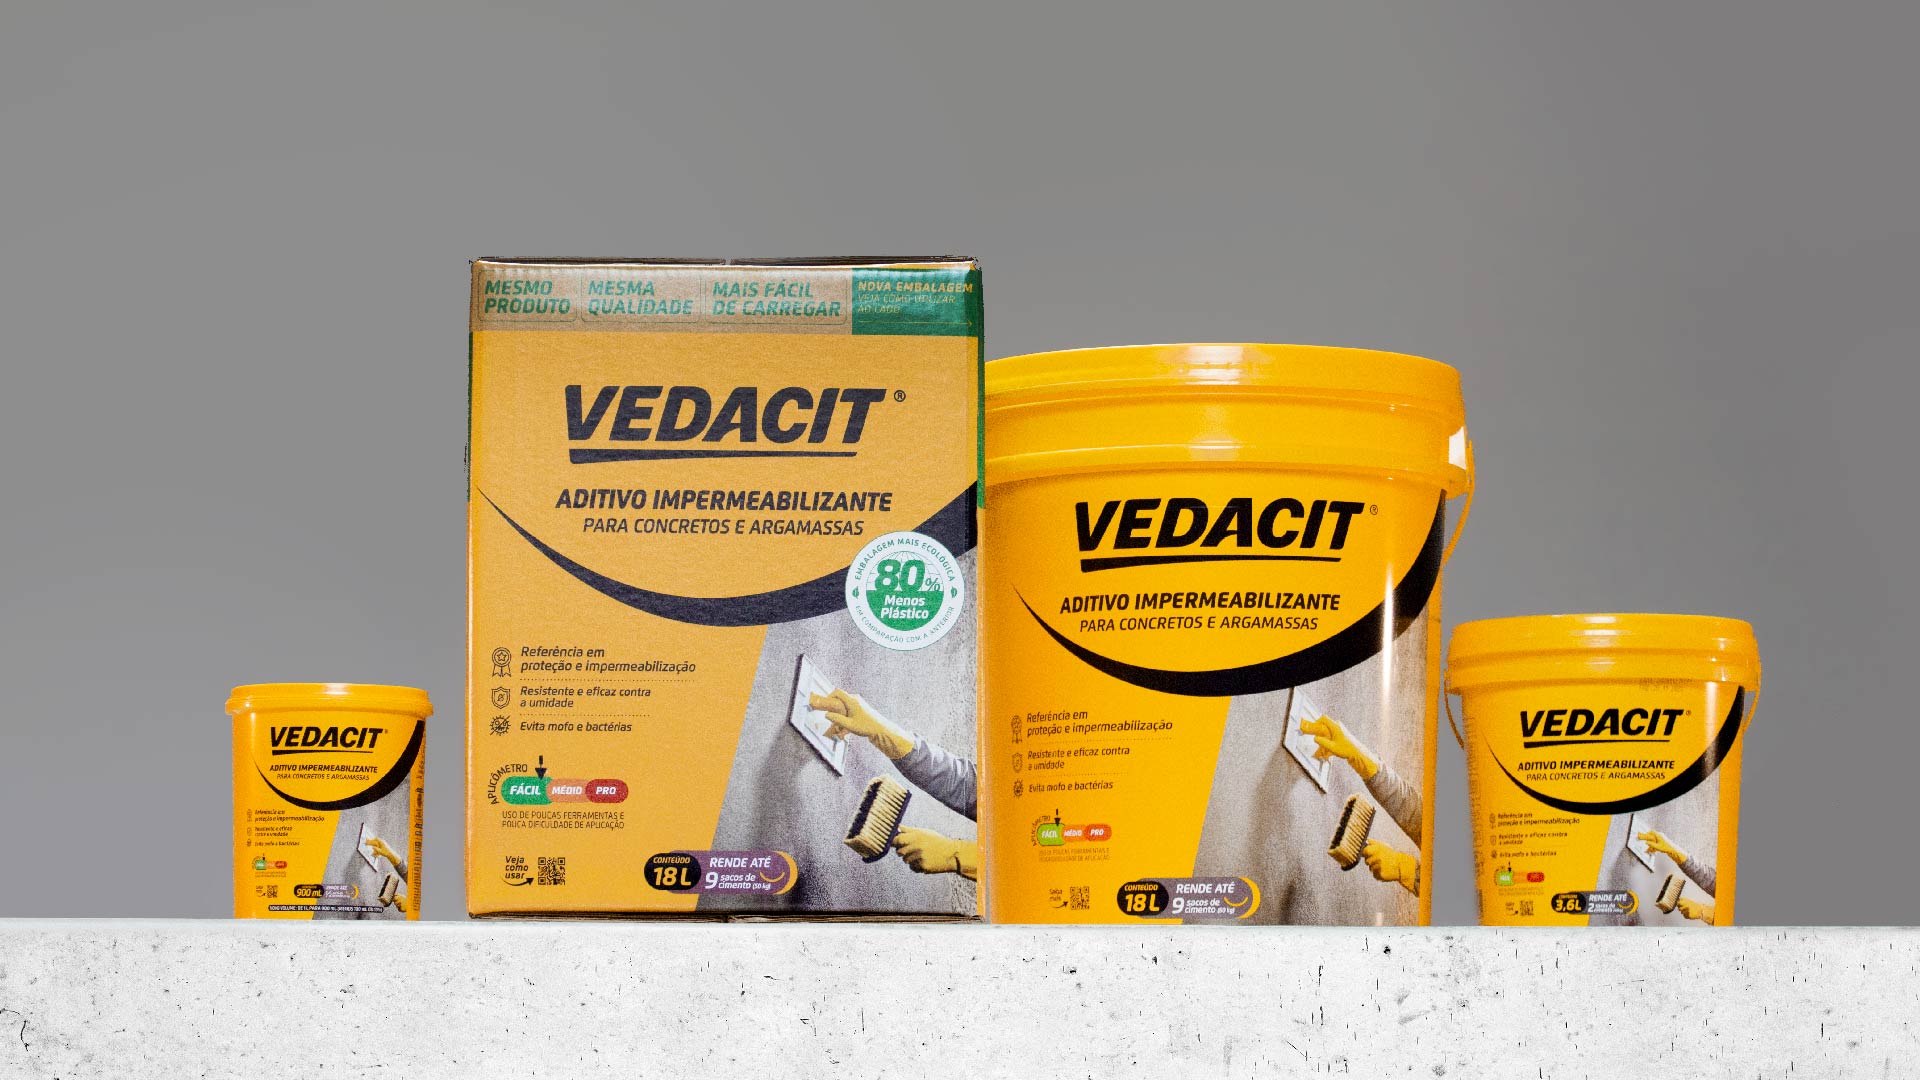 From Plastic to Paper – Vedacit in the Box by Empathy Company